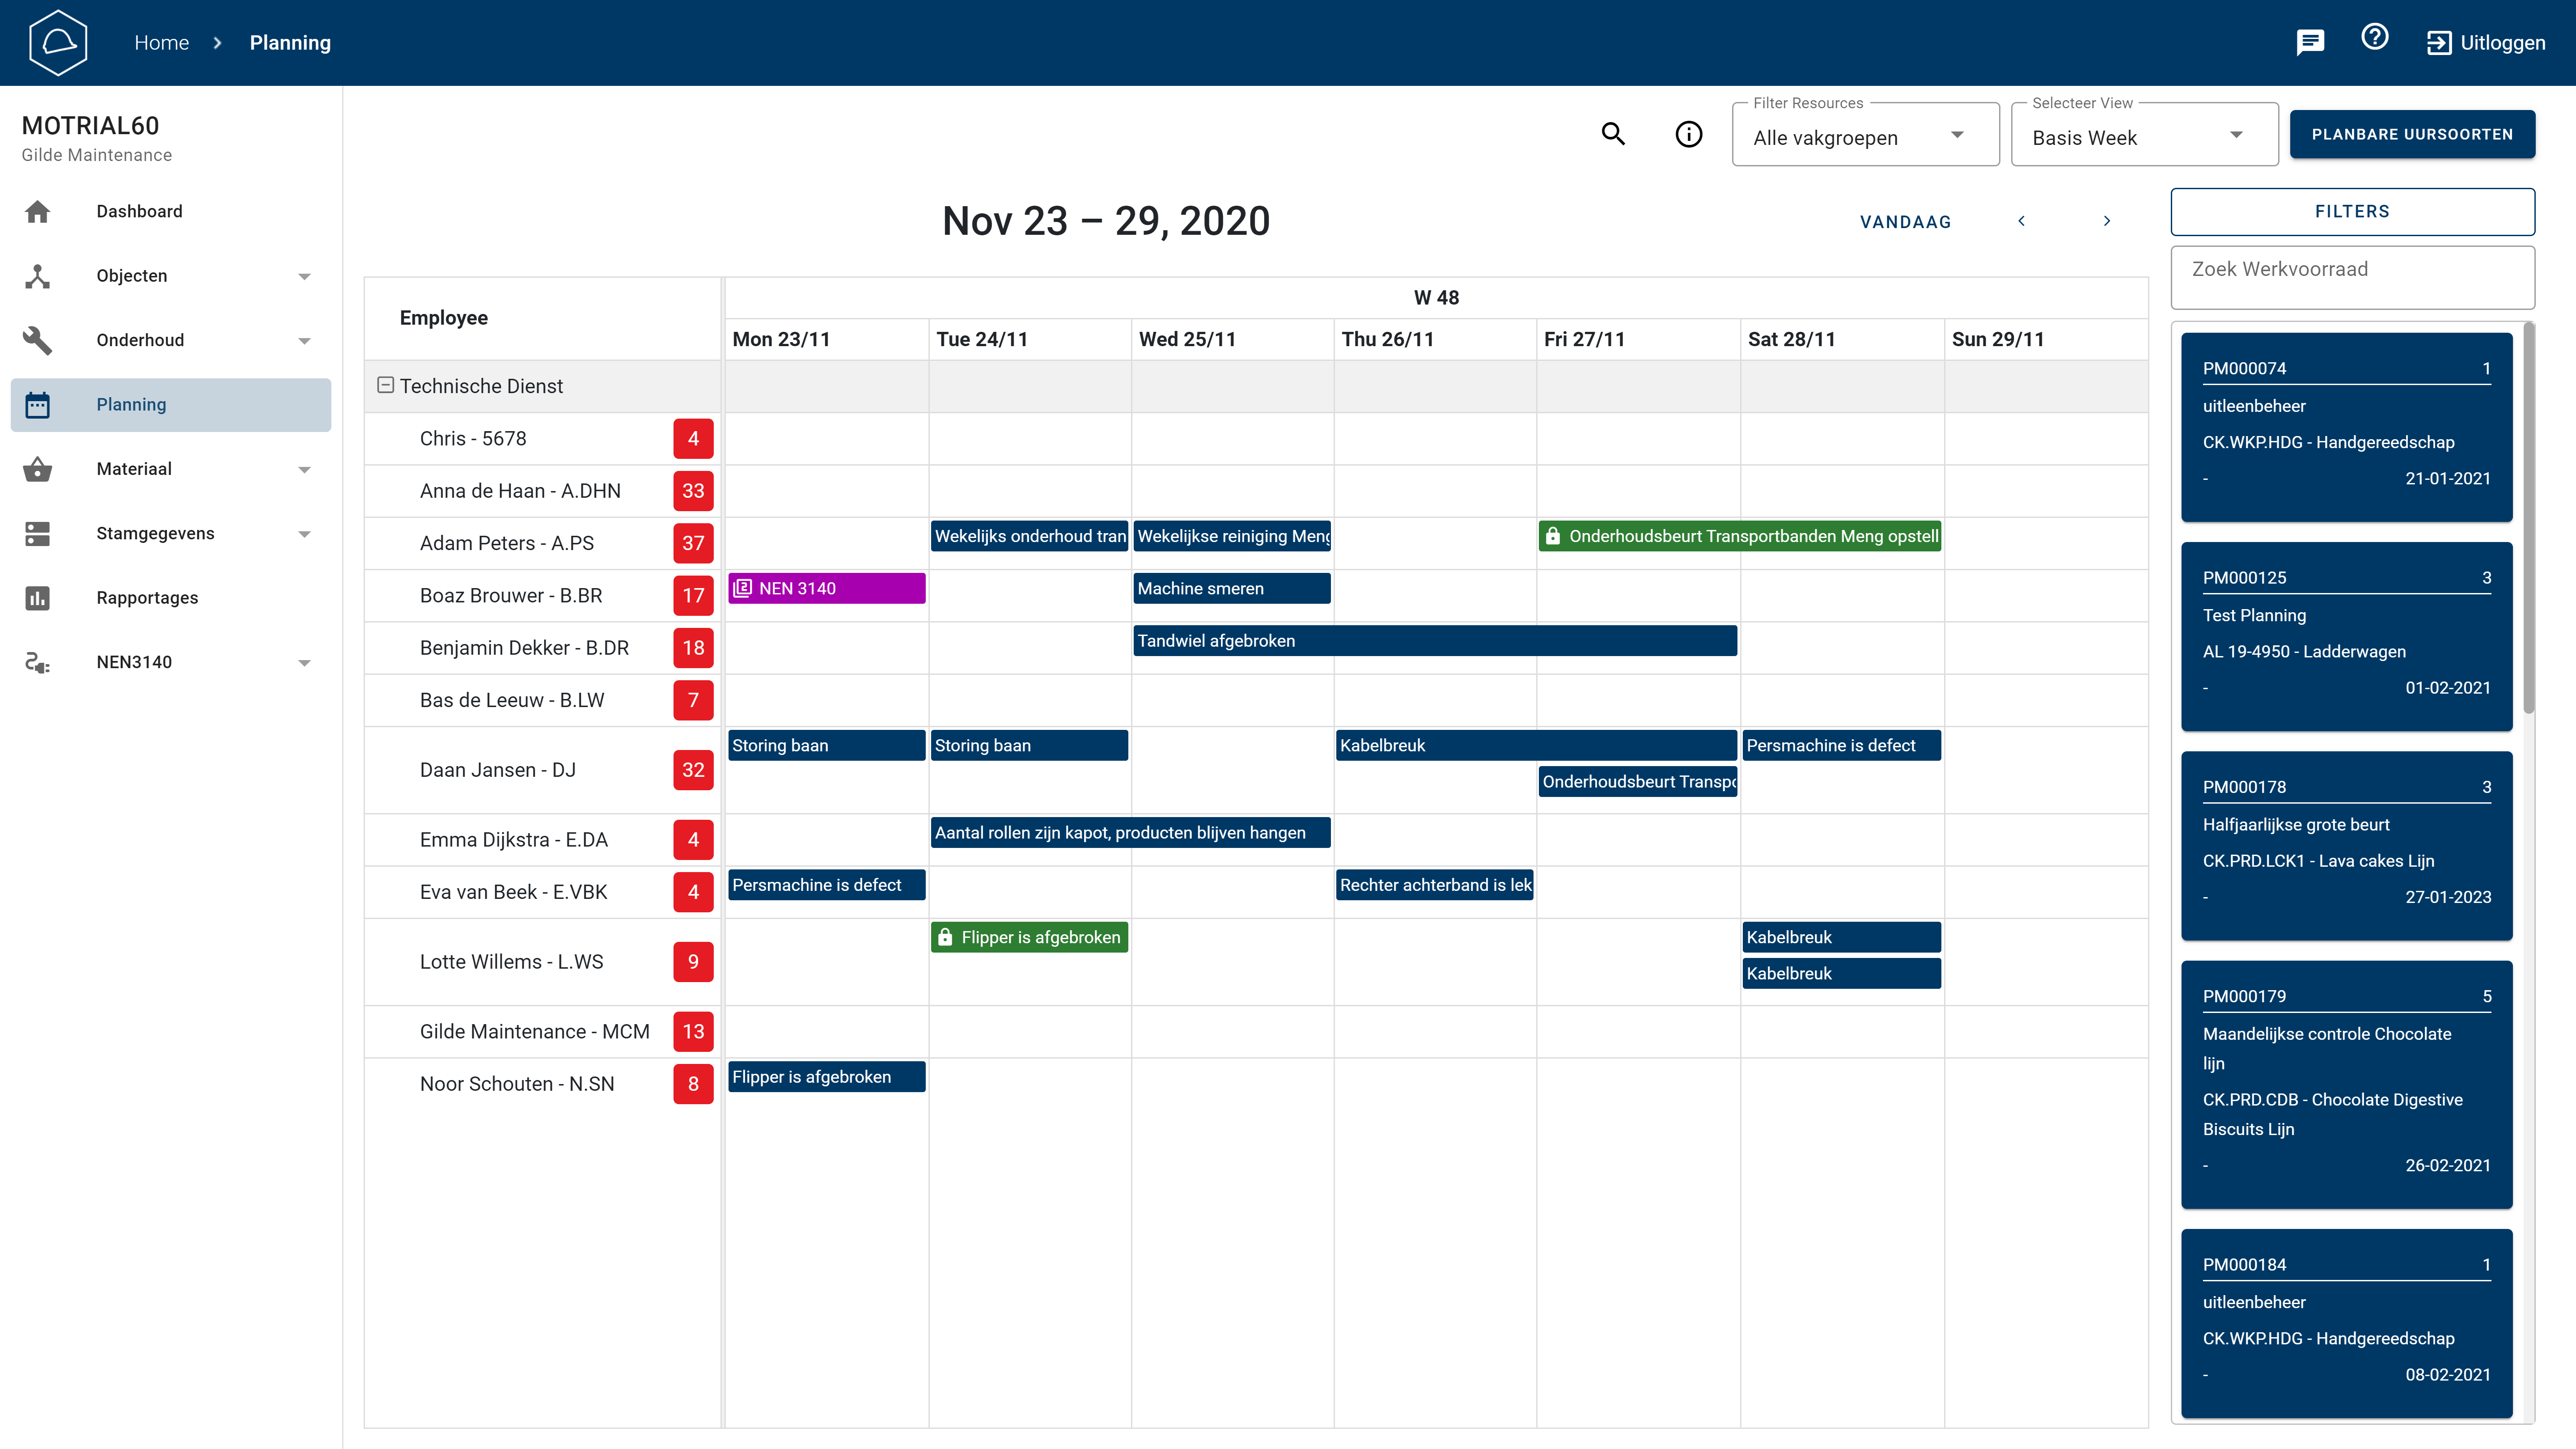 The Graphical Planboard allows you to easily plan and devide the workload. Just drag a task in your backlog and drop it in the field of one of your employees. This dashboard gives visual feedback. Now everyone knows exactly what to do and when.